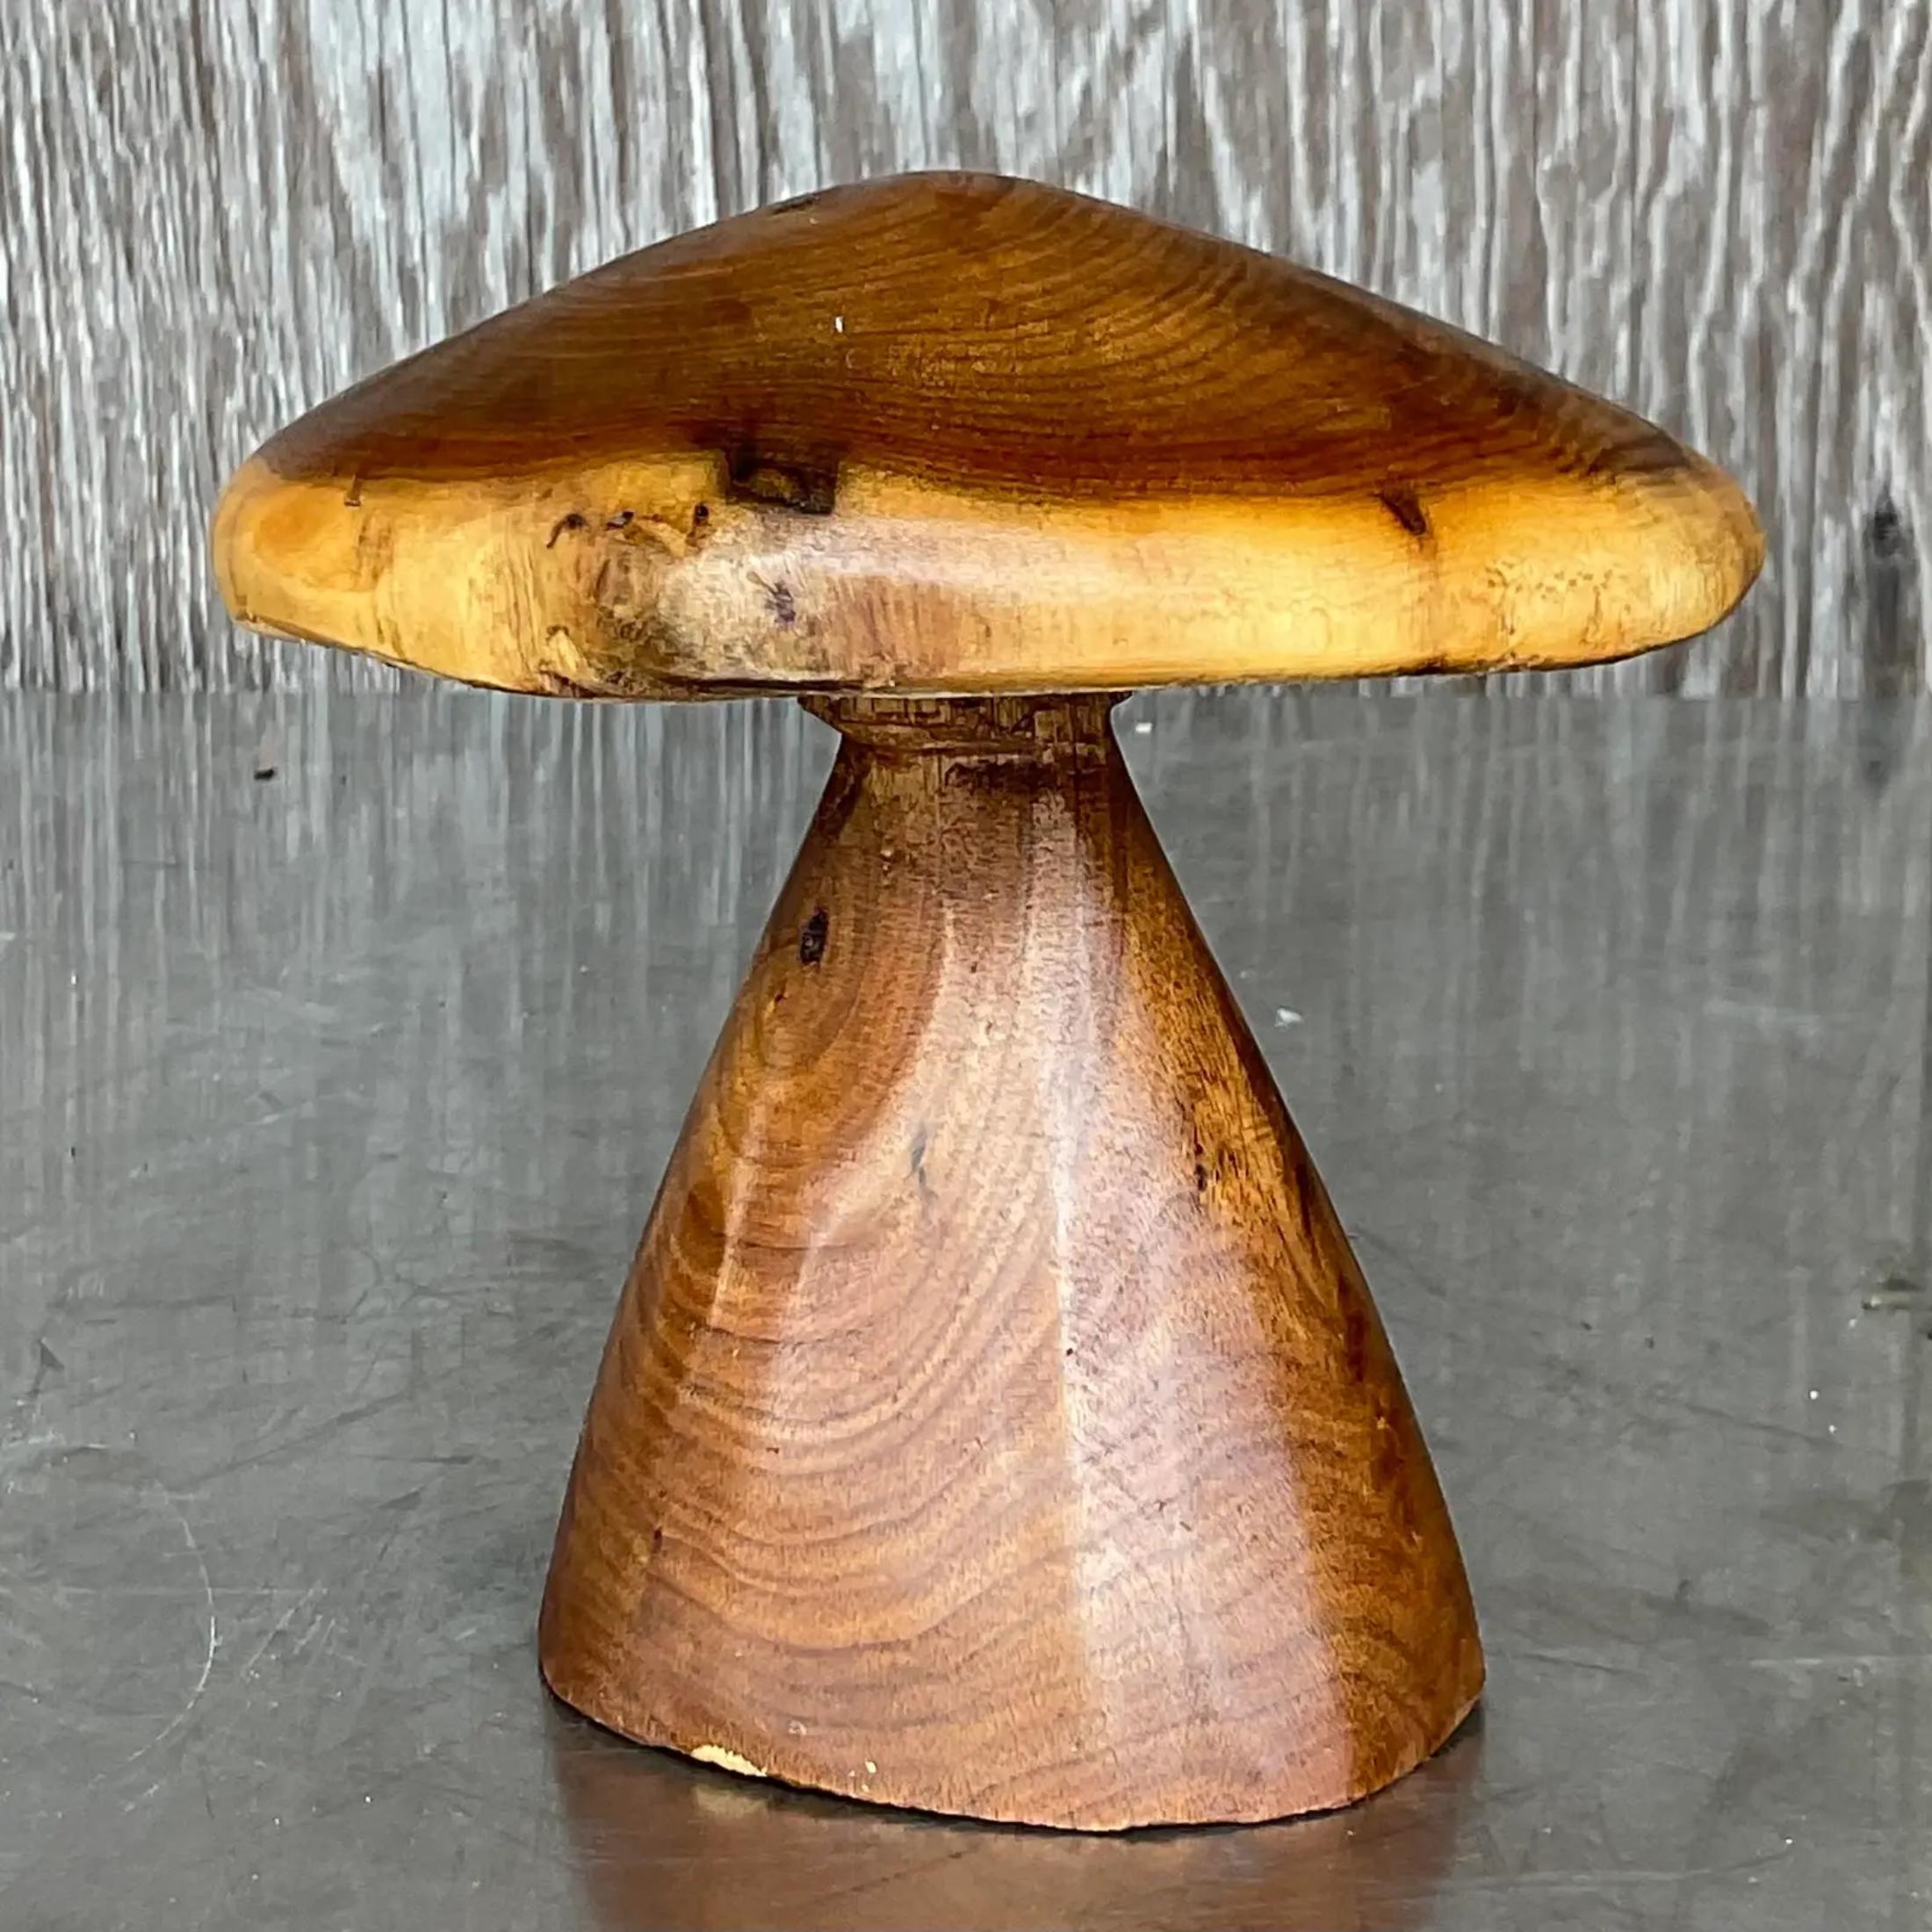 A fabulous vintage Boho solid mushroom. A charming hand carved specimen with beautiful wood grain detail. Acquired from a Palm Beach estate.